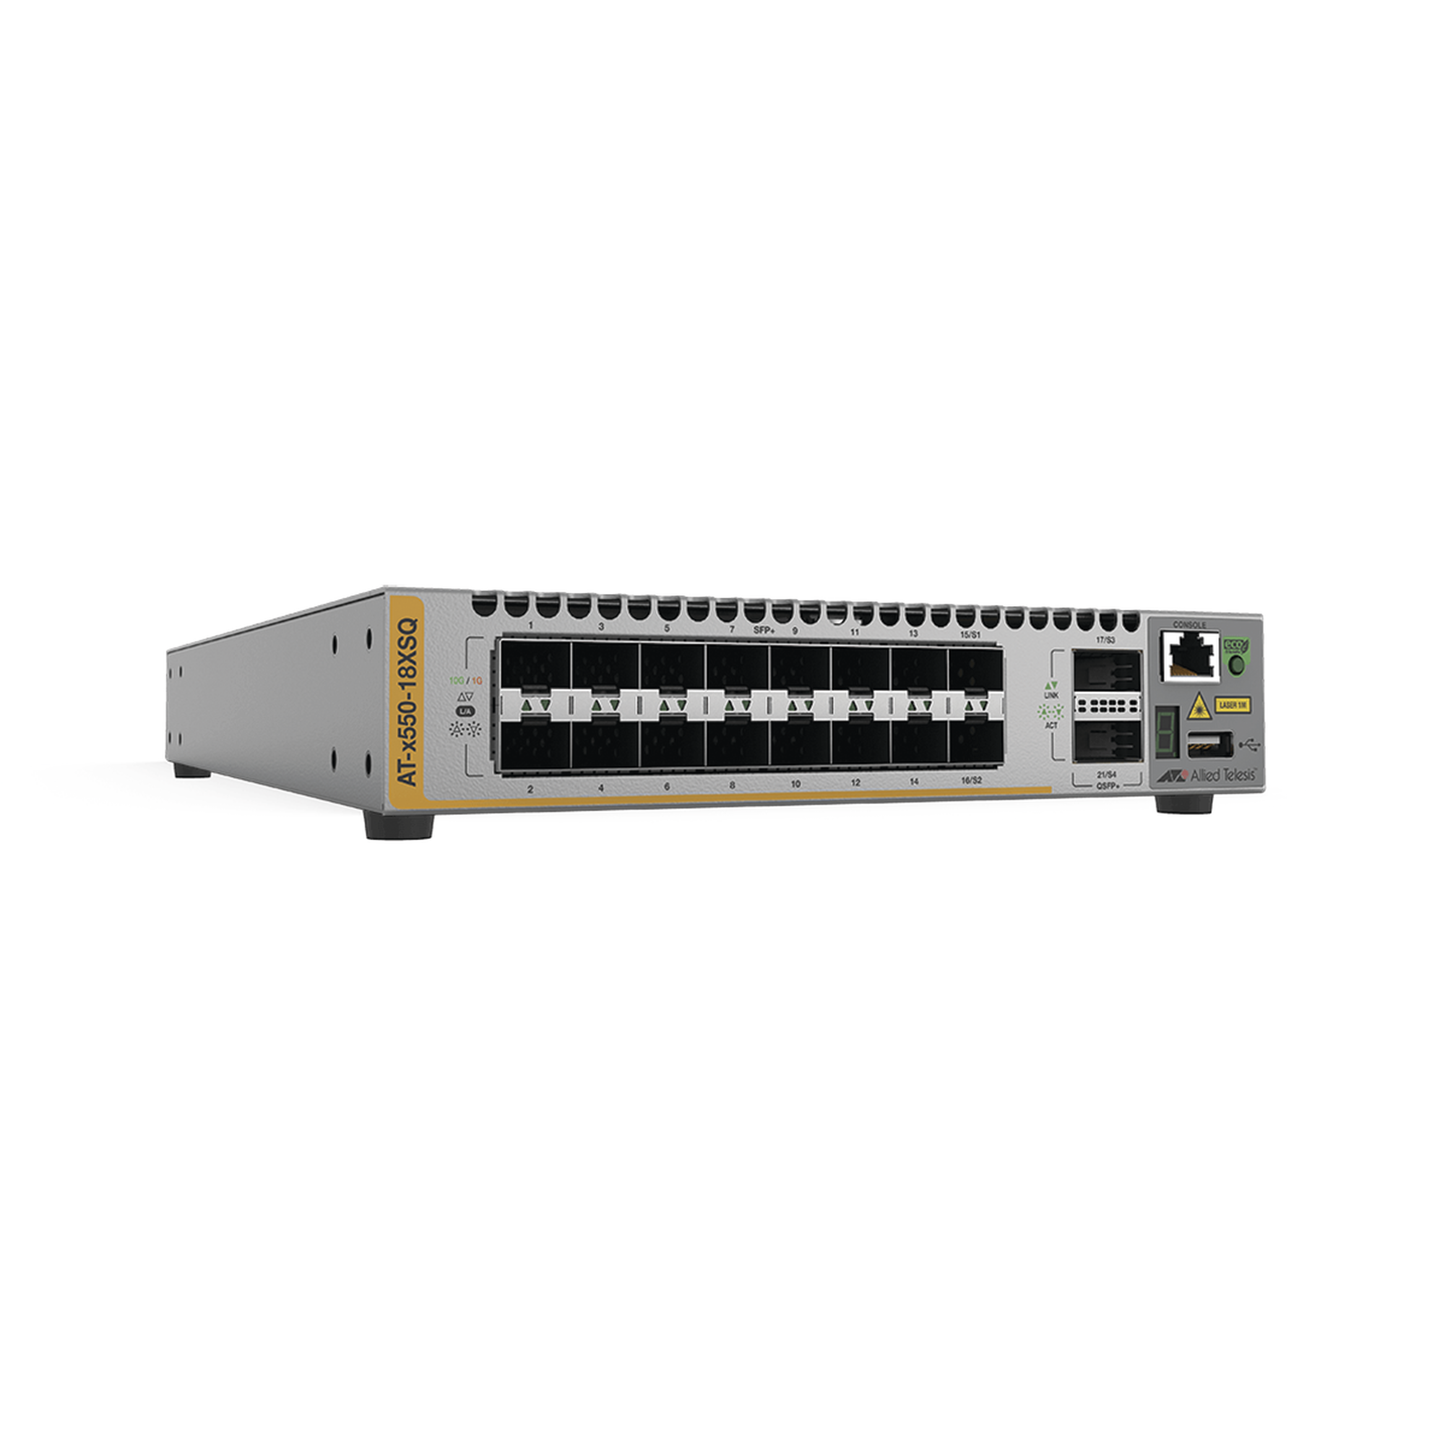 Switch Stackeable Inteligente Capa 3, 16x 1/10G SFP+ y 2x 40G QSFP